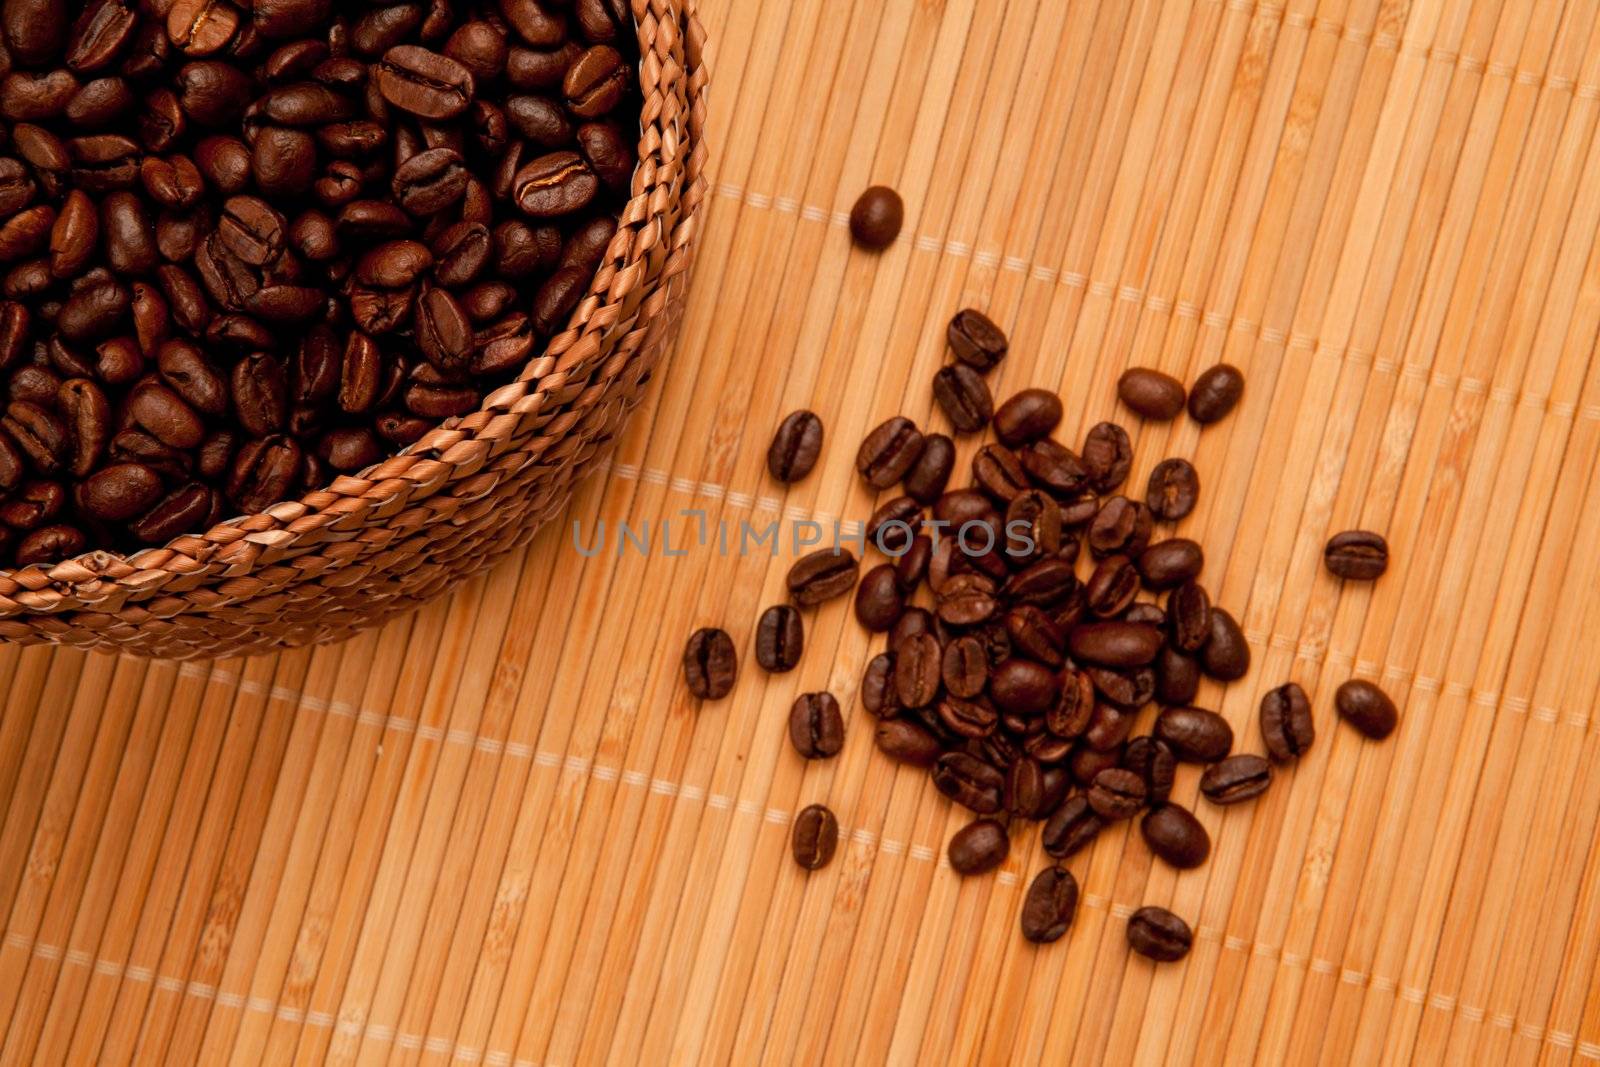 Seeds in front of a basket full of coffee seeds by Wavebreakmedia